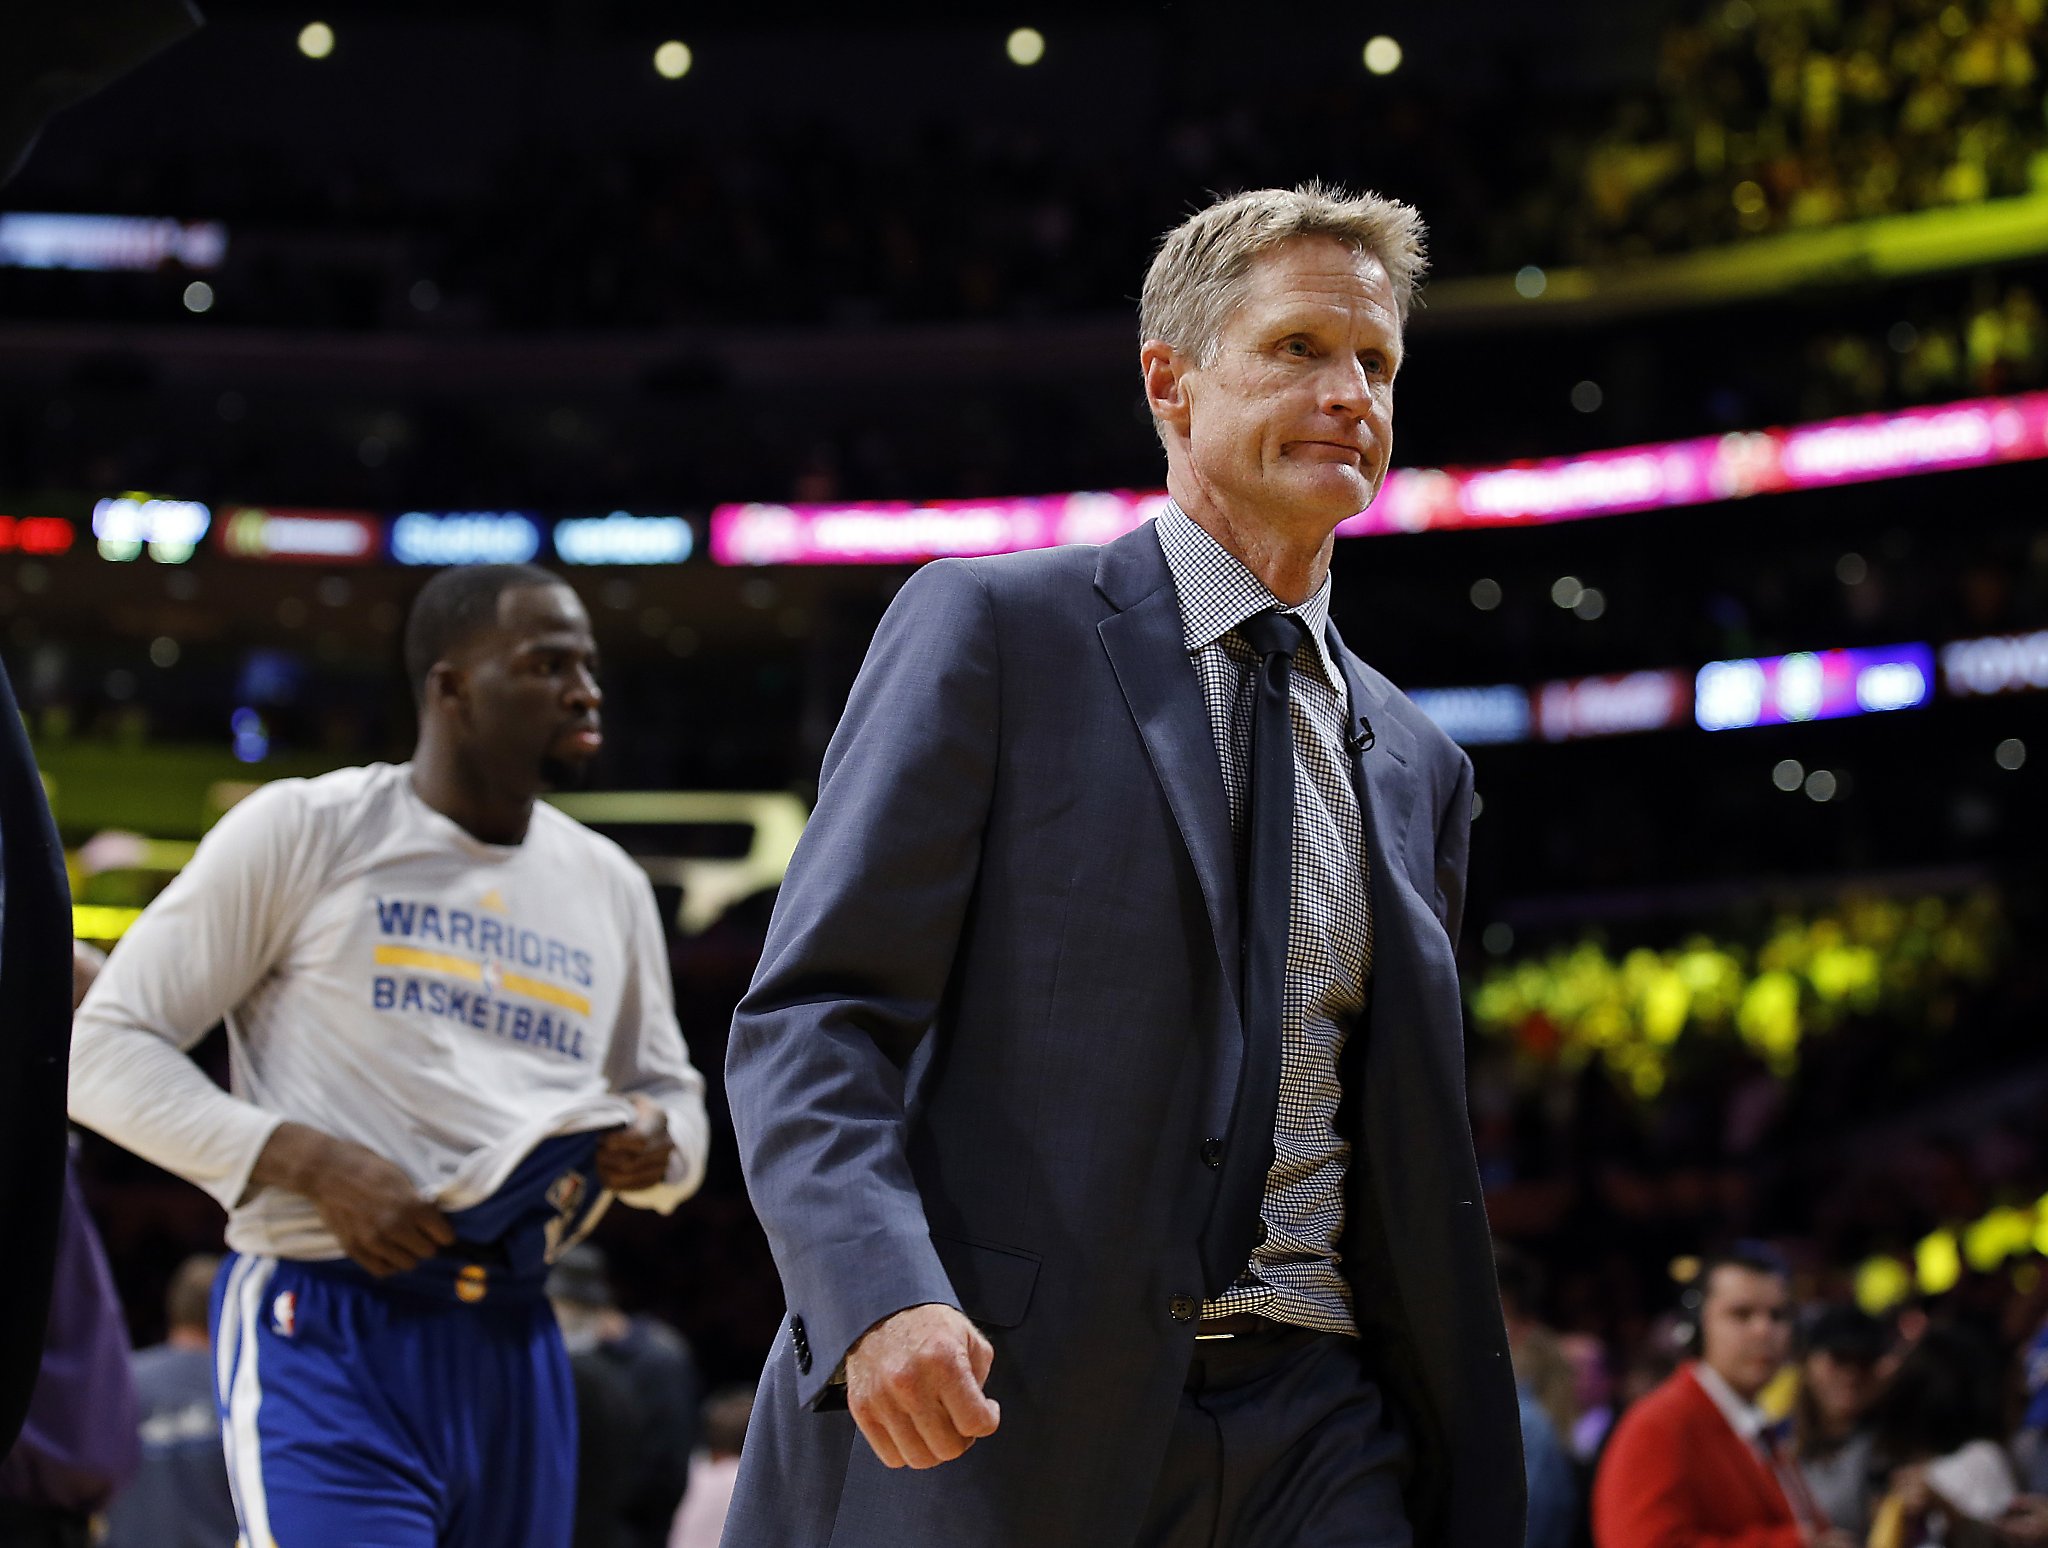 Golden State's Steve Kerr wins NBA's coach of the year – The Denver Post